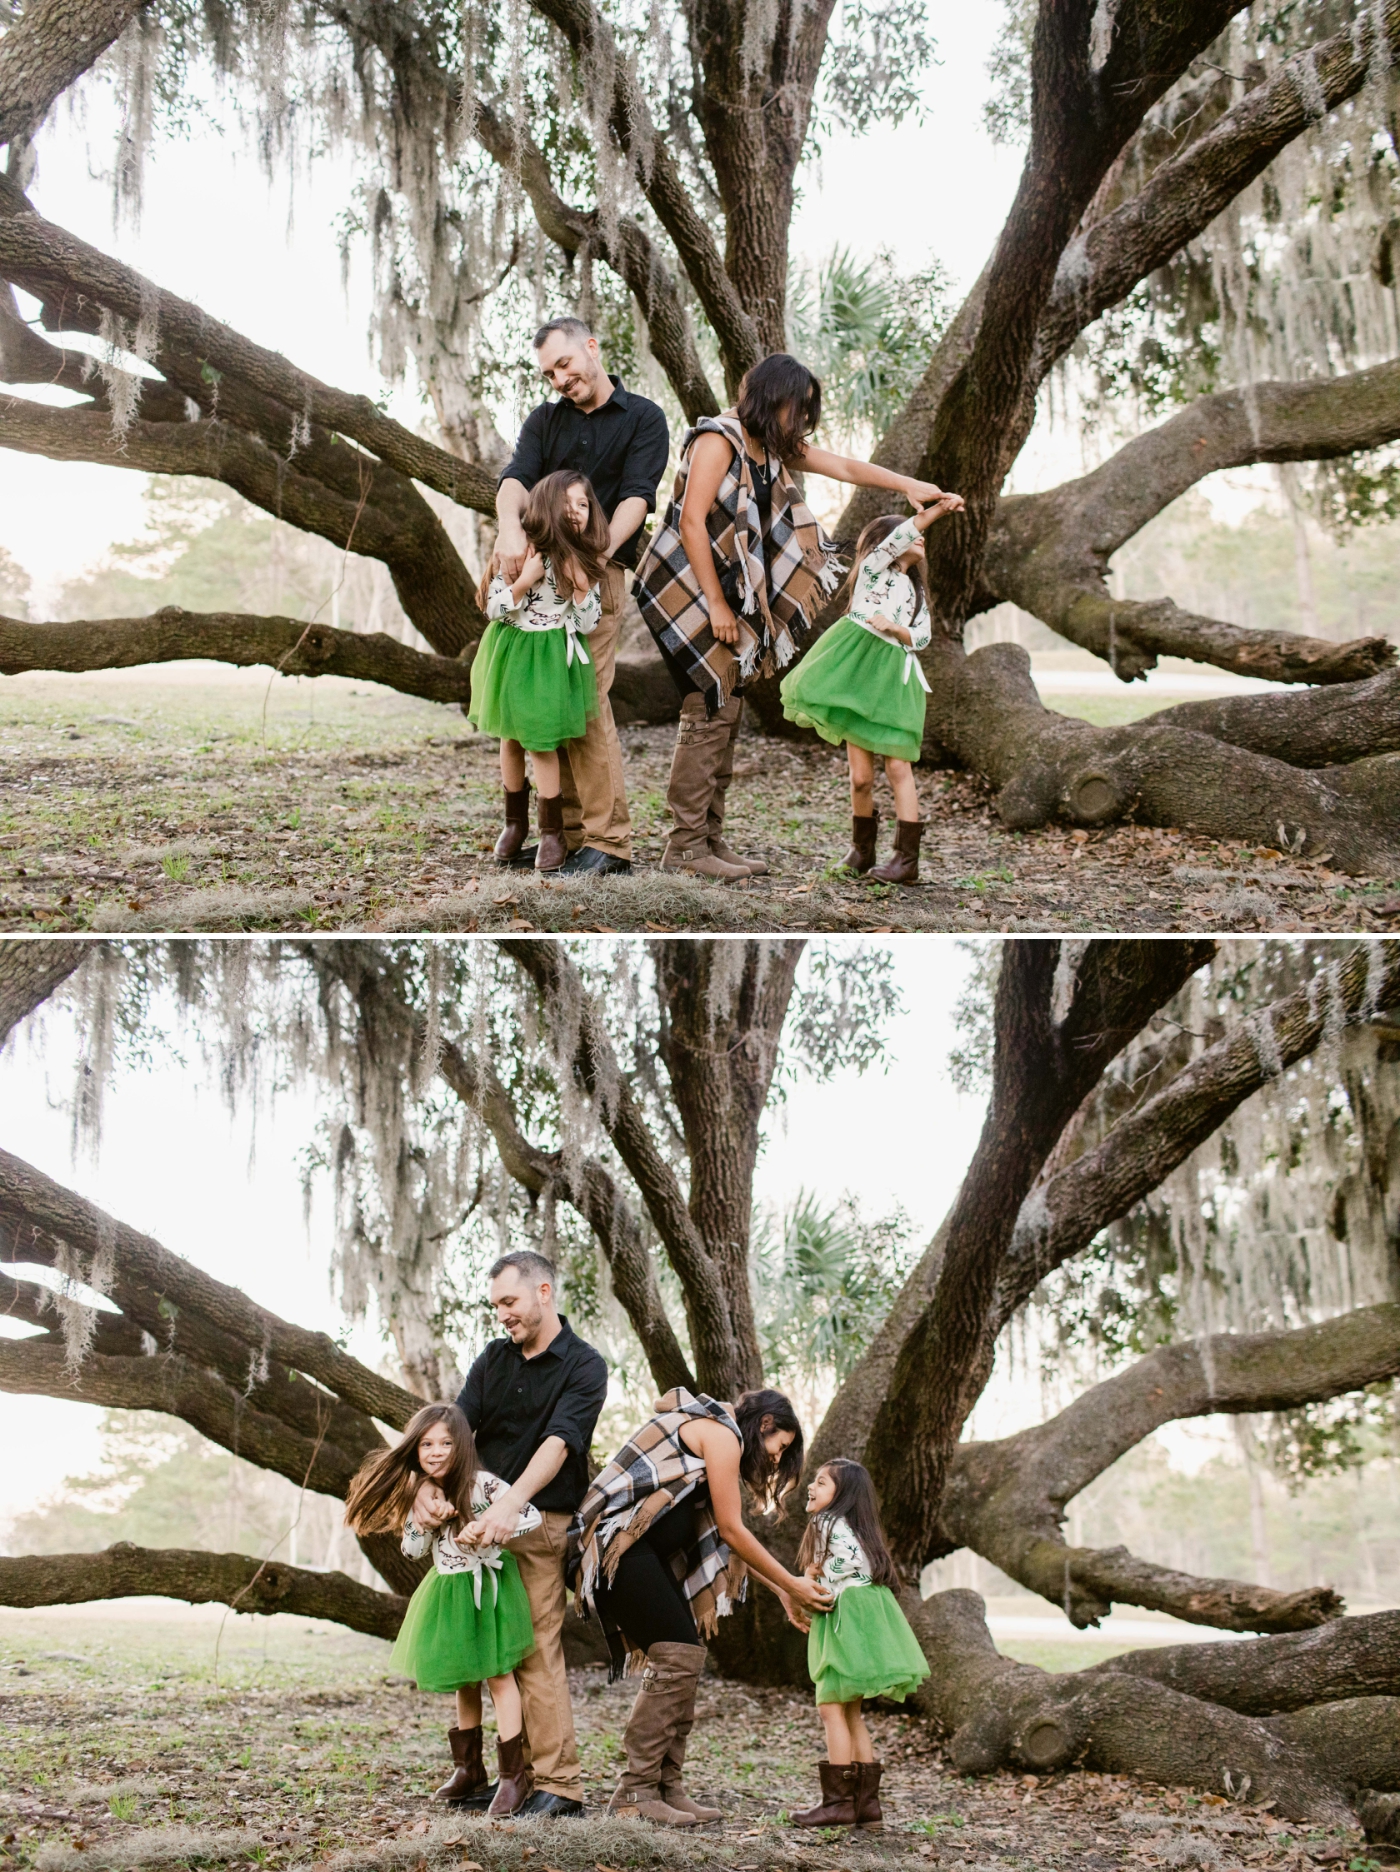 Savannah maternity and family photographer - Izzy and Co.